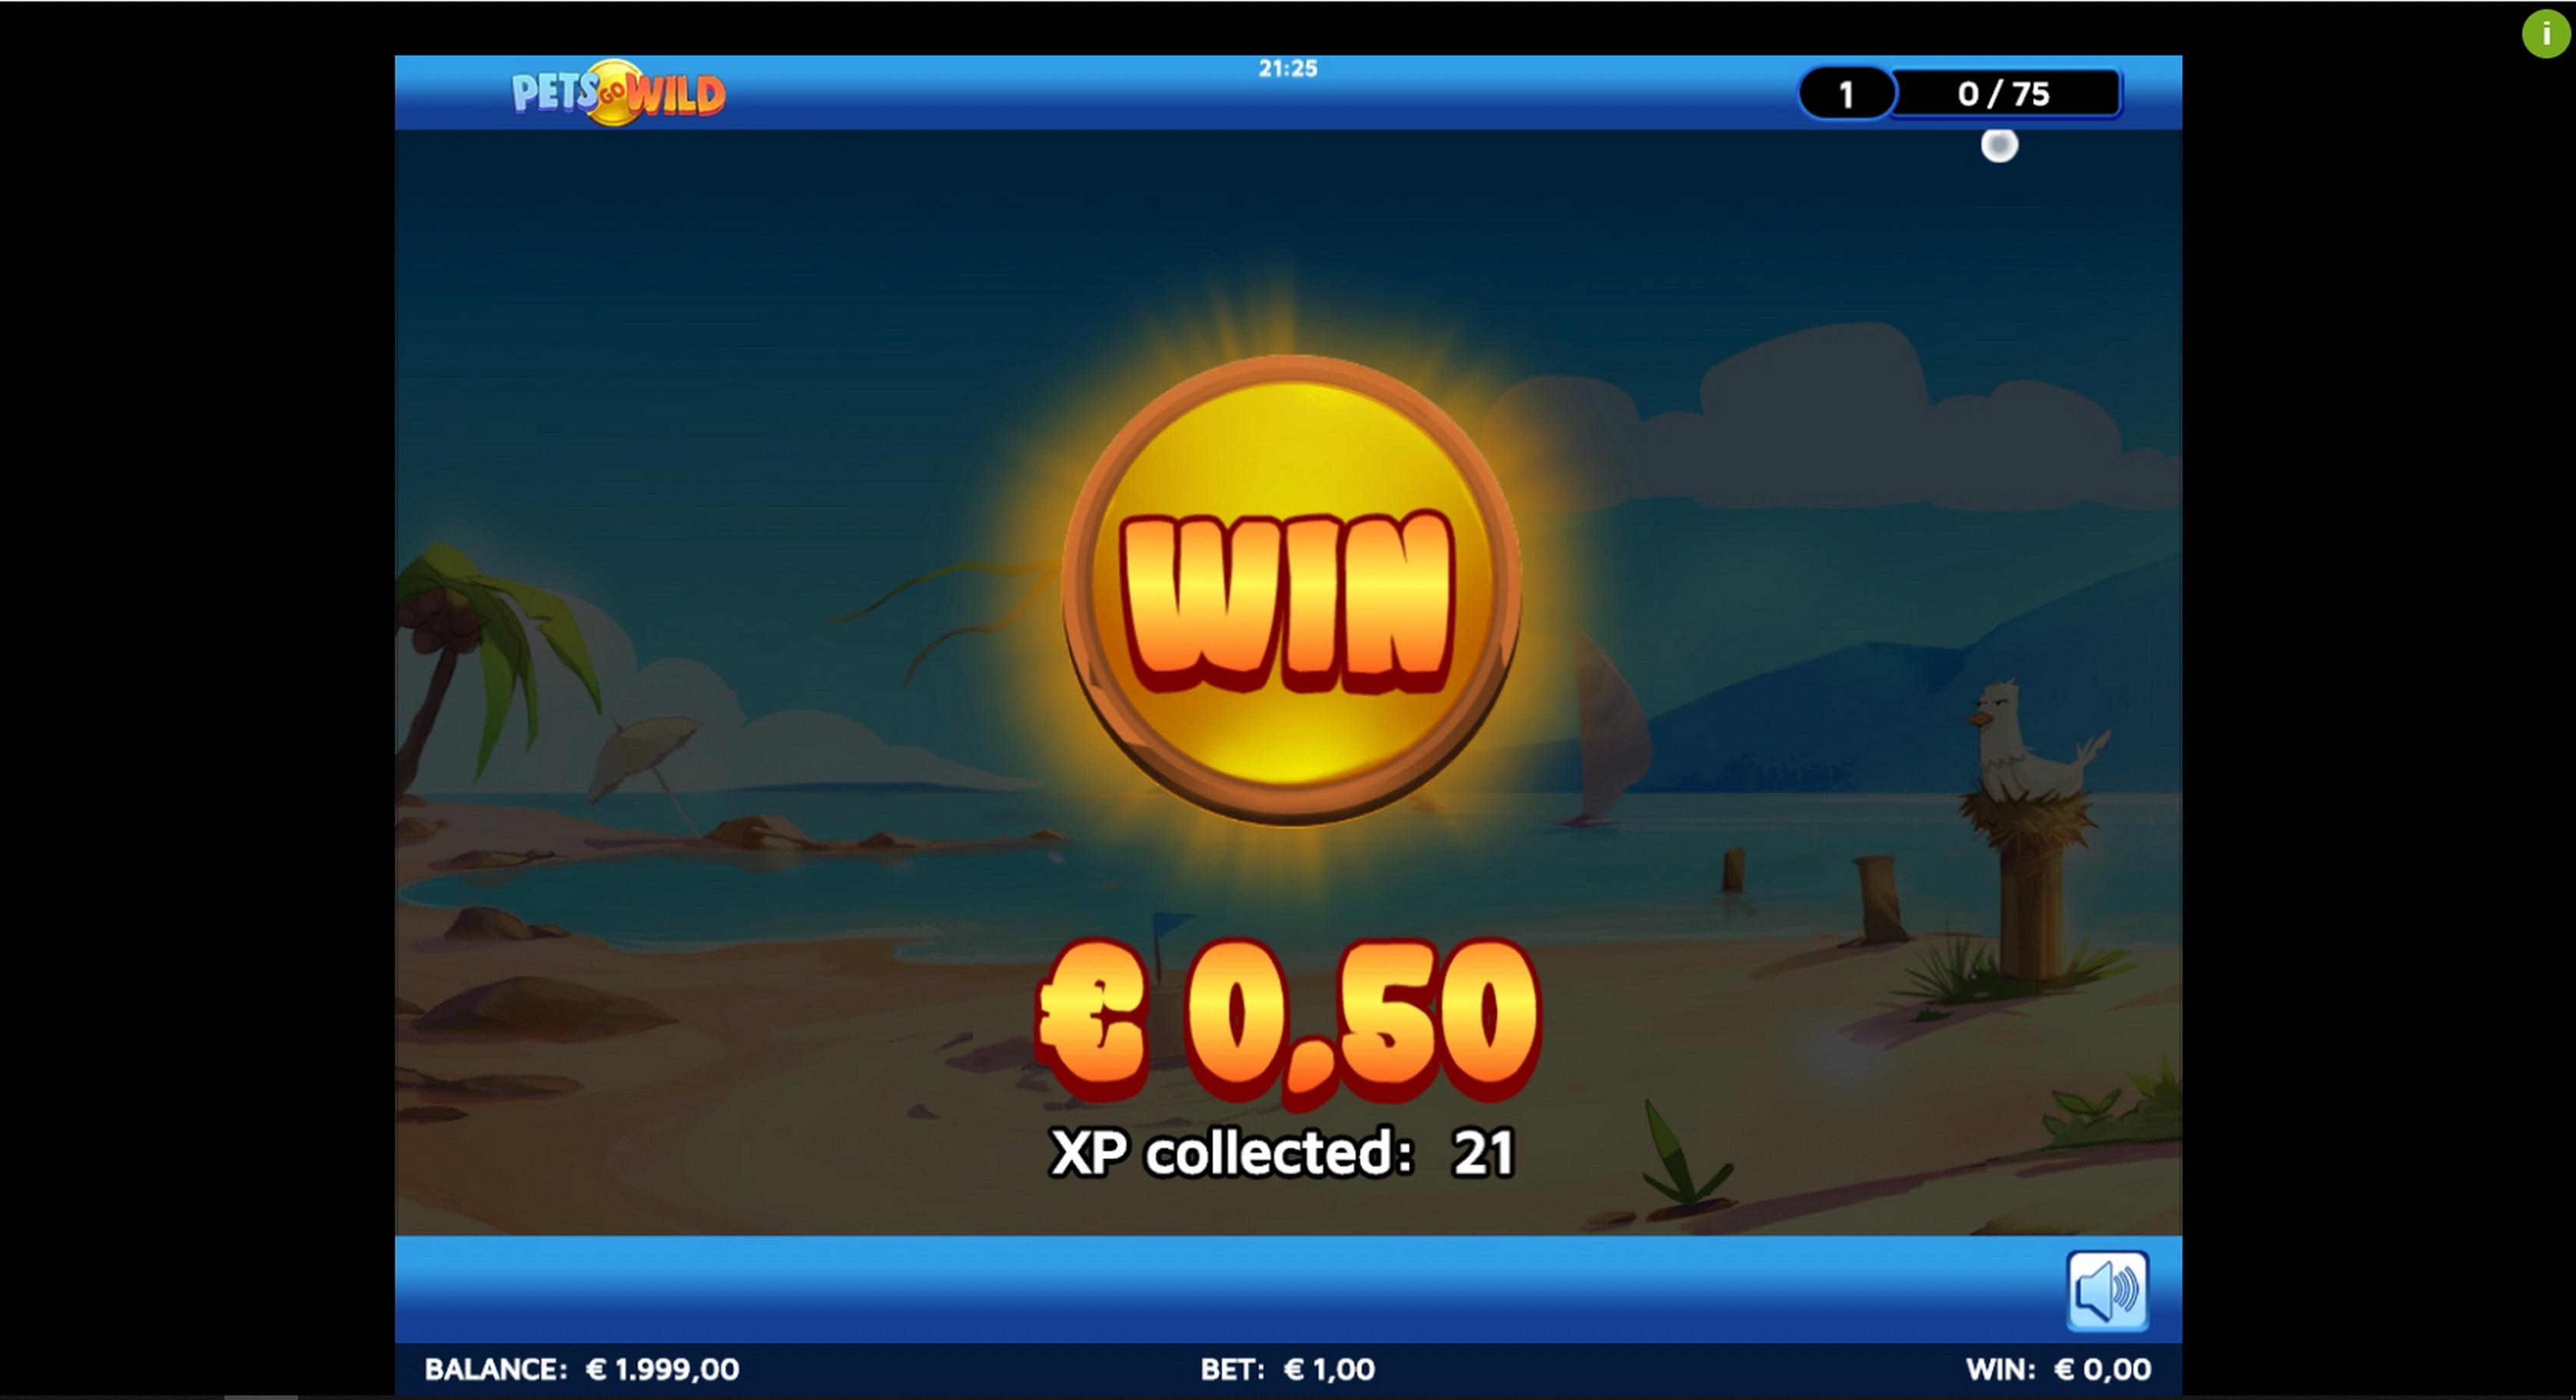 Win Money in Pets Go Wild Free Slot Game by Skillzzgaming